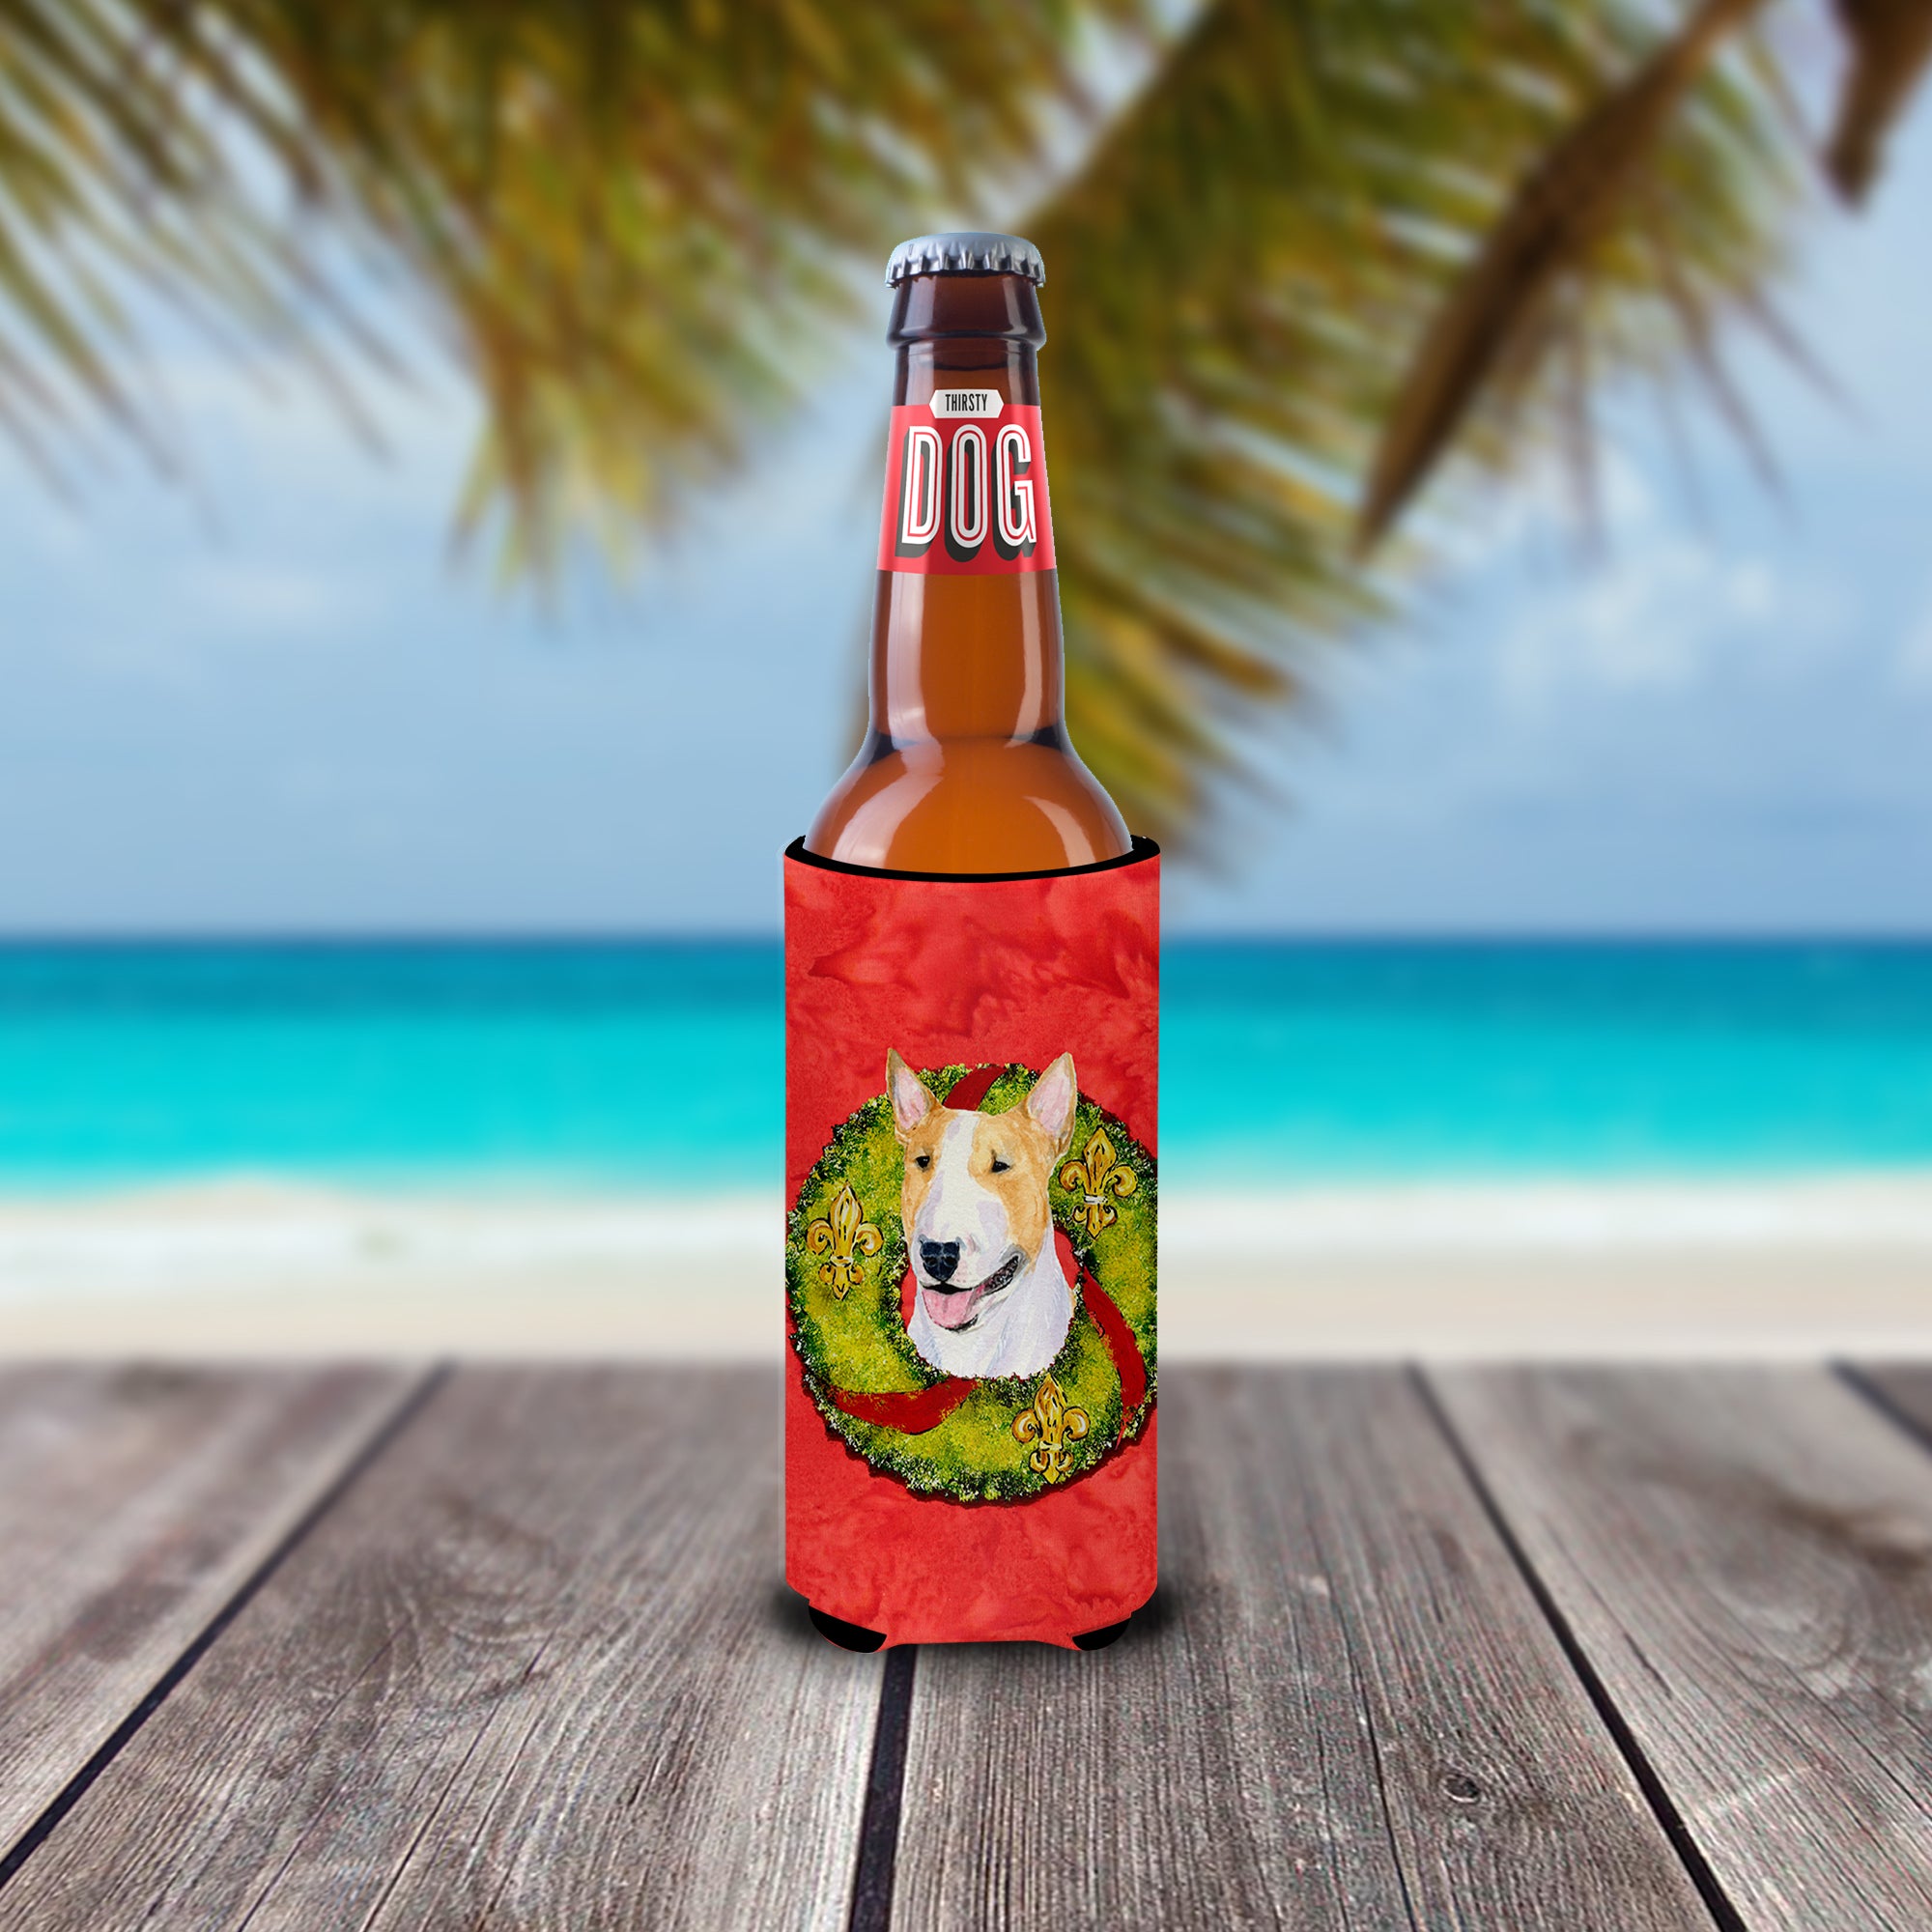 Bull Terrier Cristmas Wreath Ultra Beverage Insulators for slim cans SS4185MUK.